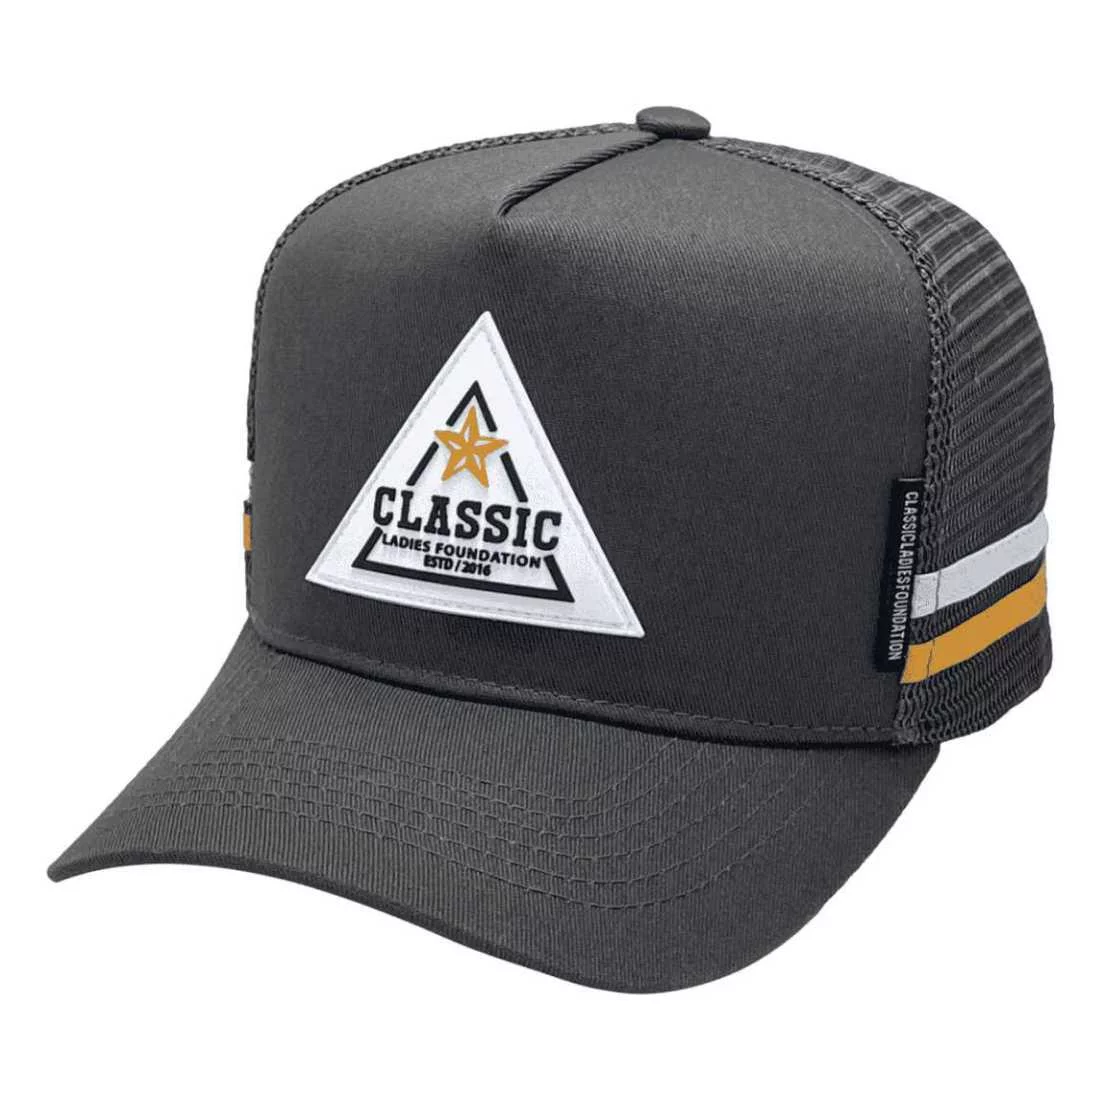 Classic Ladies Foundation HP Mens Midrange Aussie Trucker Hat with Rubber Badge Decoration and Original 2 Side Bands Charcoal Acrylic